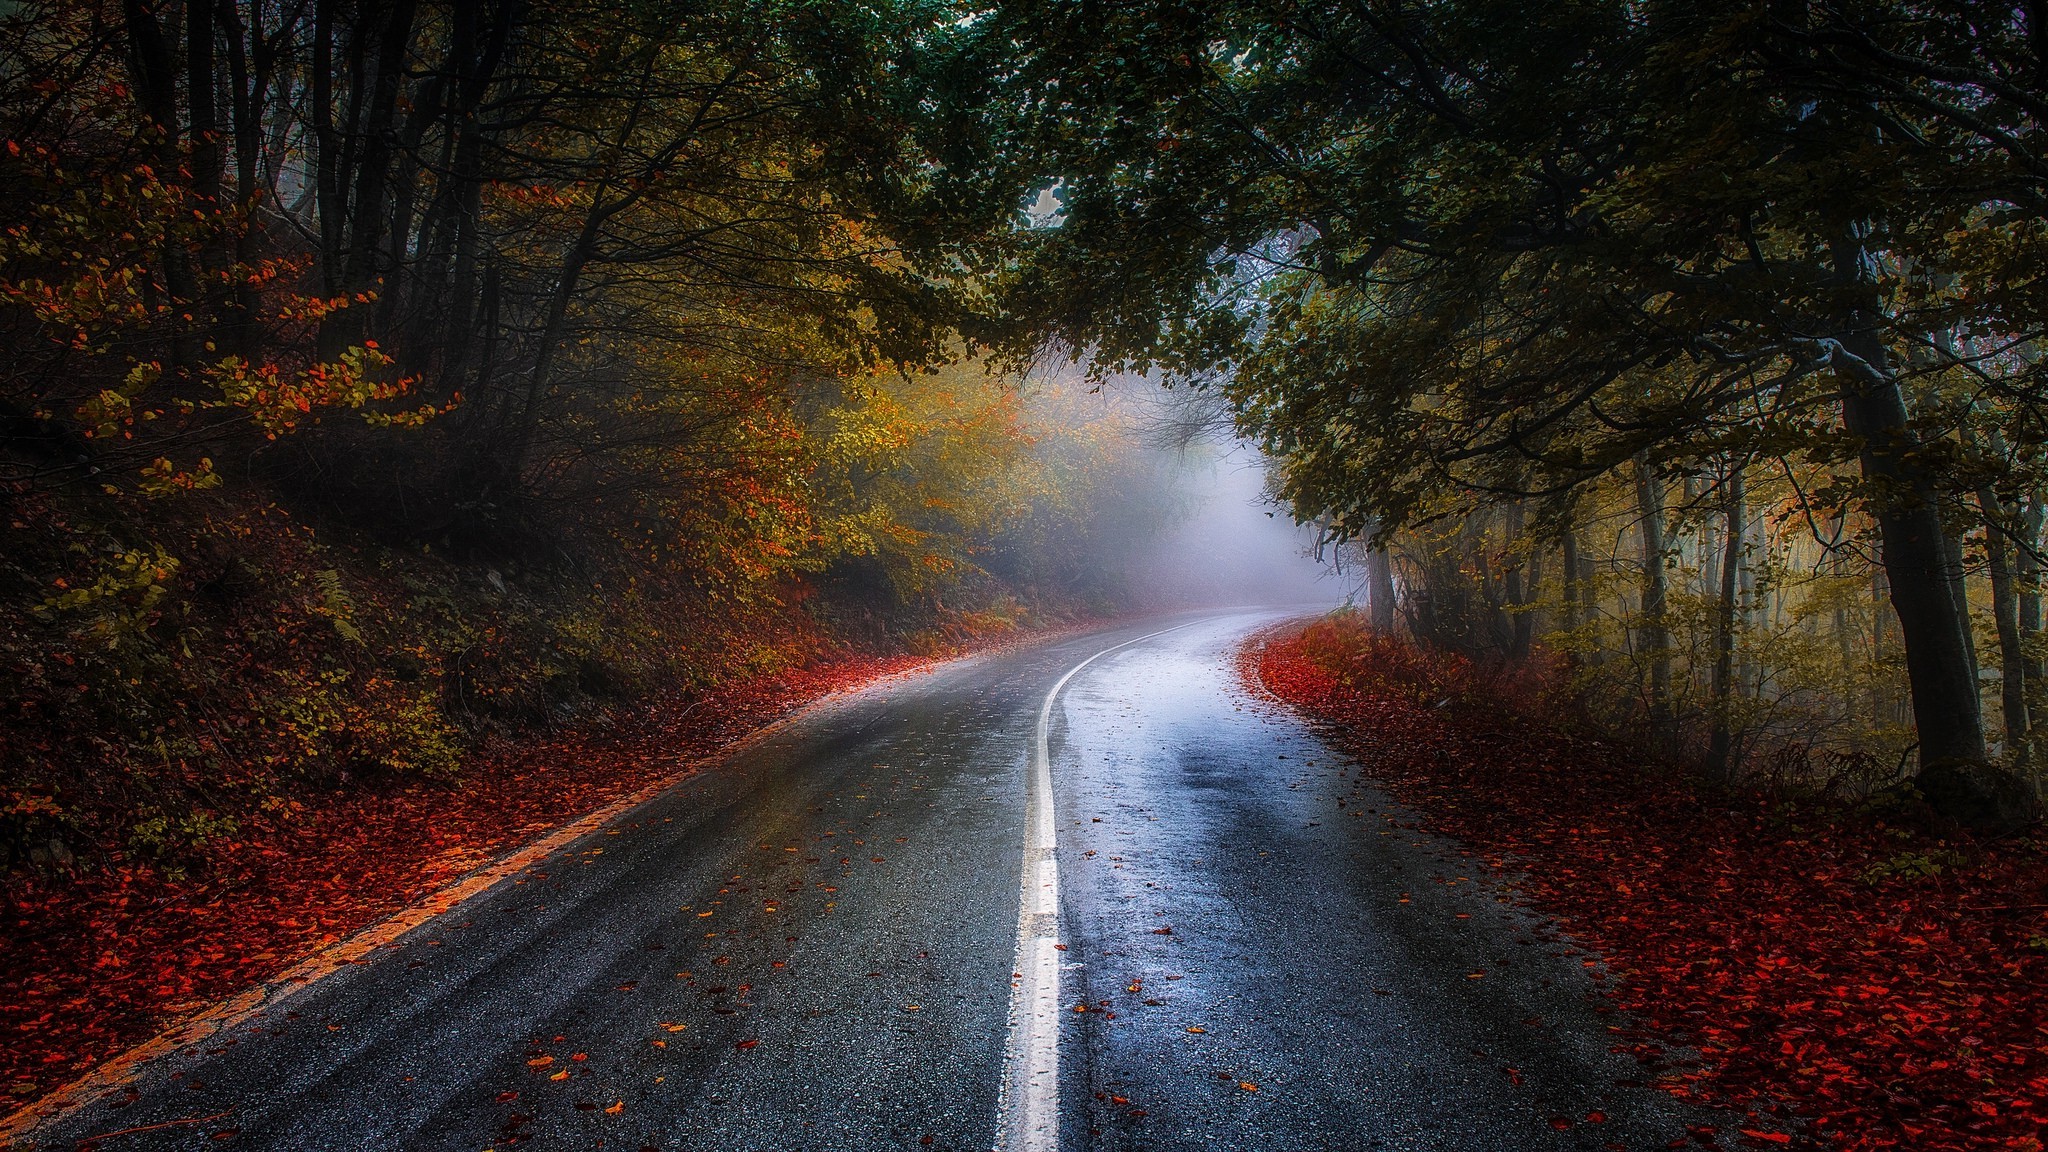 nature, Photography, Landscape, Road, Forest, Mist, Morning, Sunlight, Trees, Fall, Leaves, Red, Blue, Shrubs, Greece Wallpaper